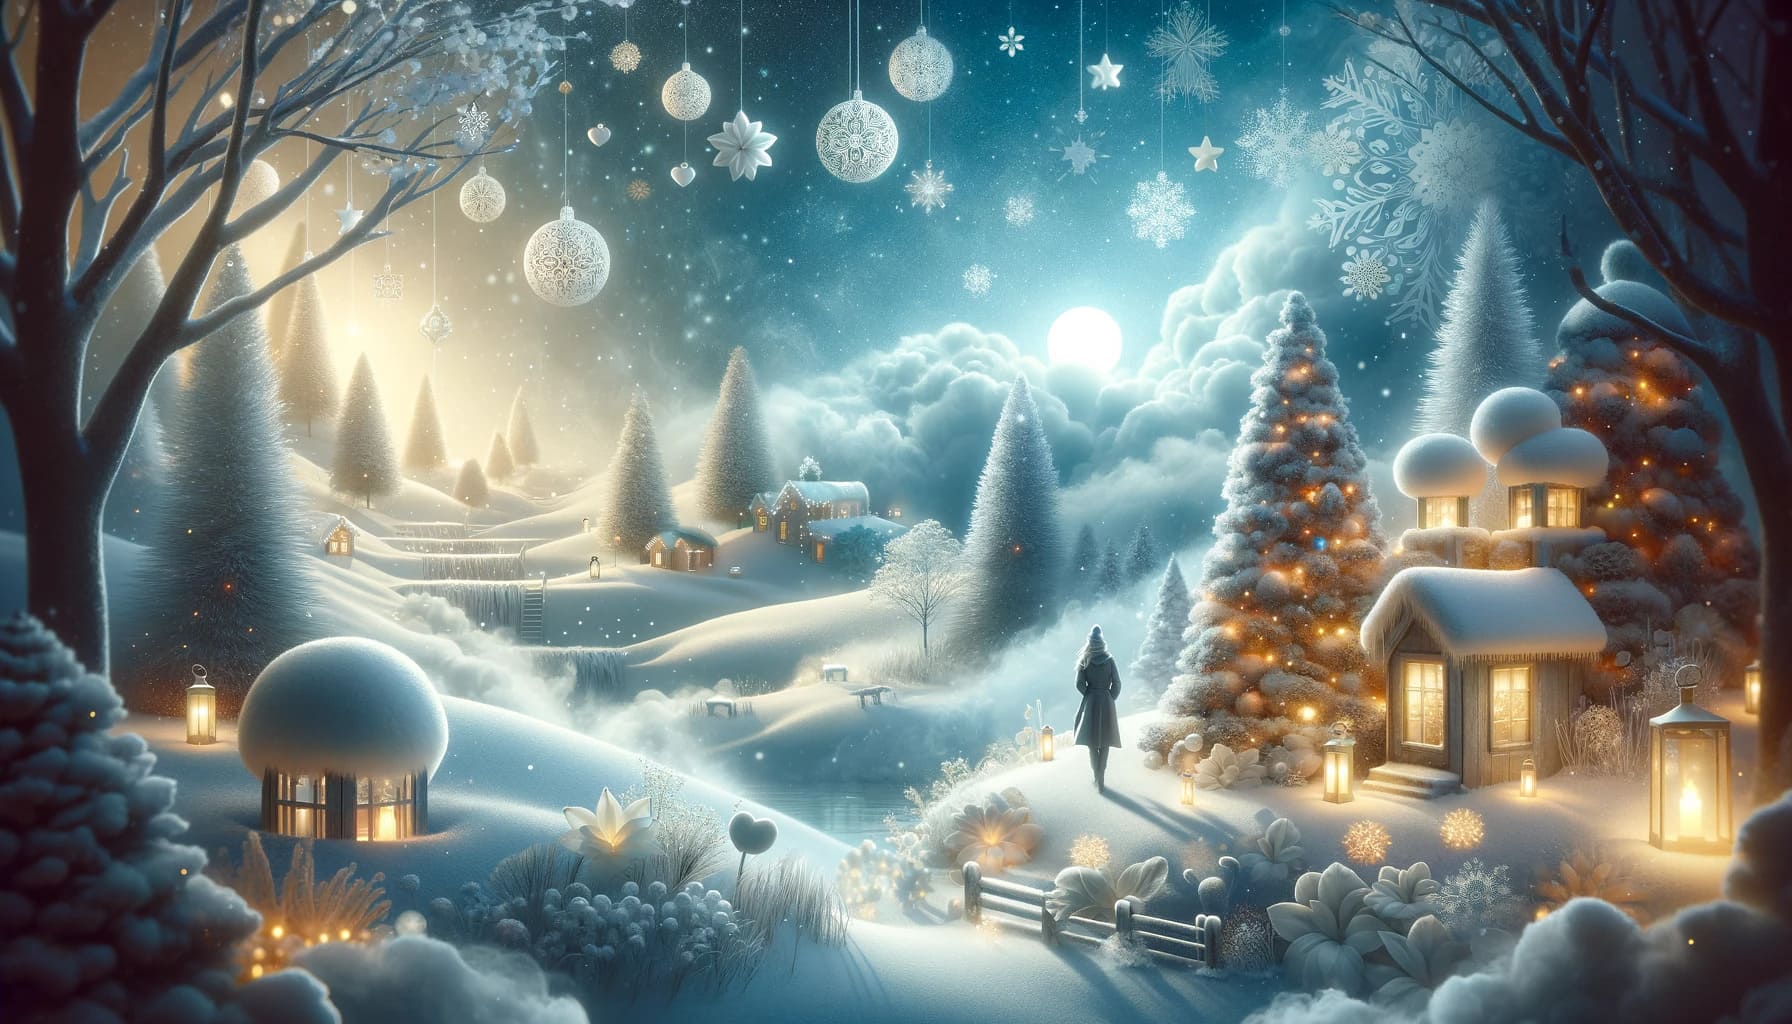 Dream of christmas meaning